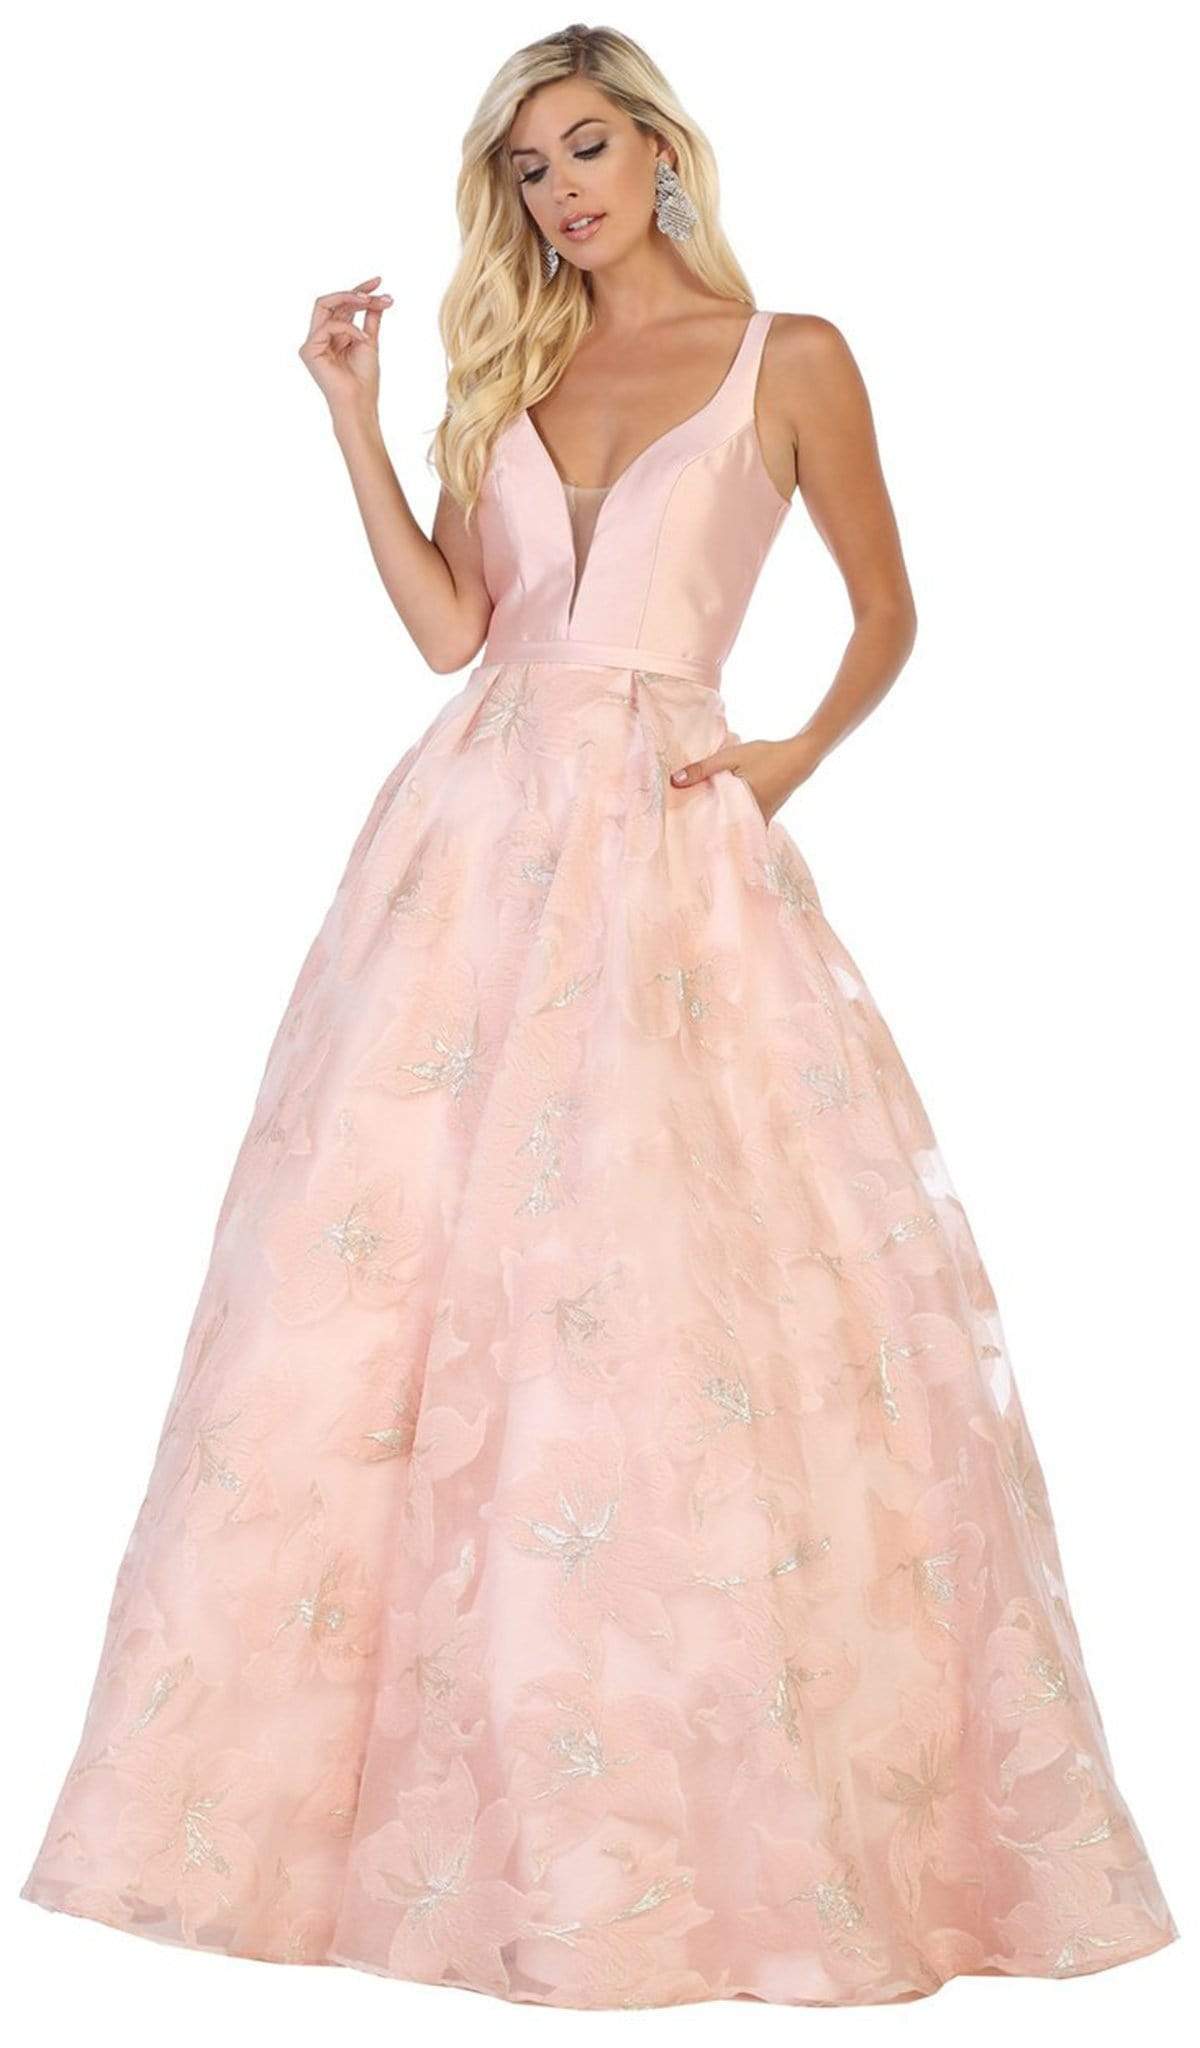 May Queen - RQ7730 Plunging V-Neck Floral Ballgown Special Occasion Dress 4 / Blush